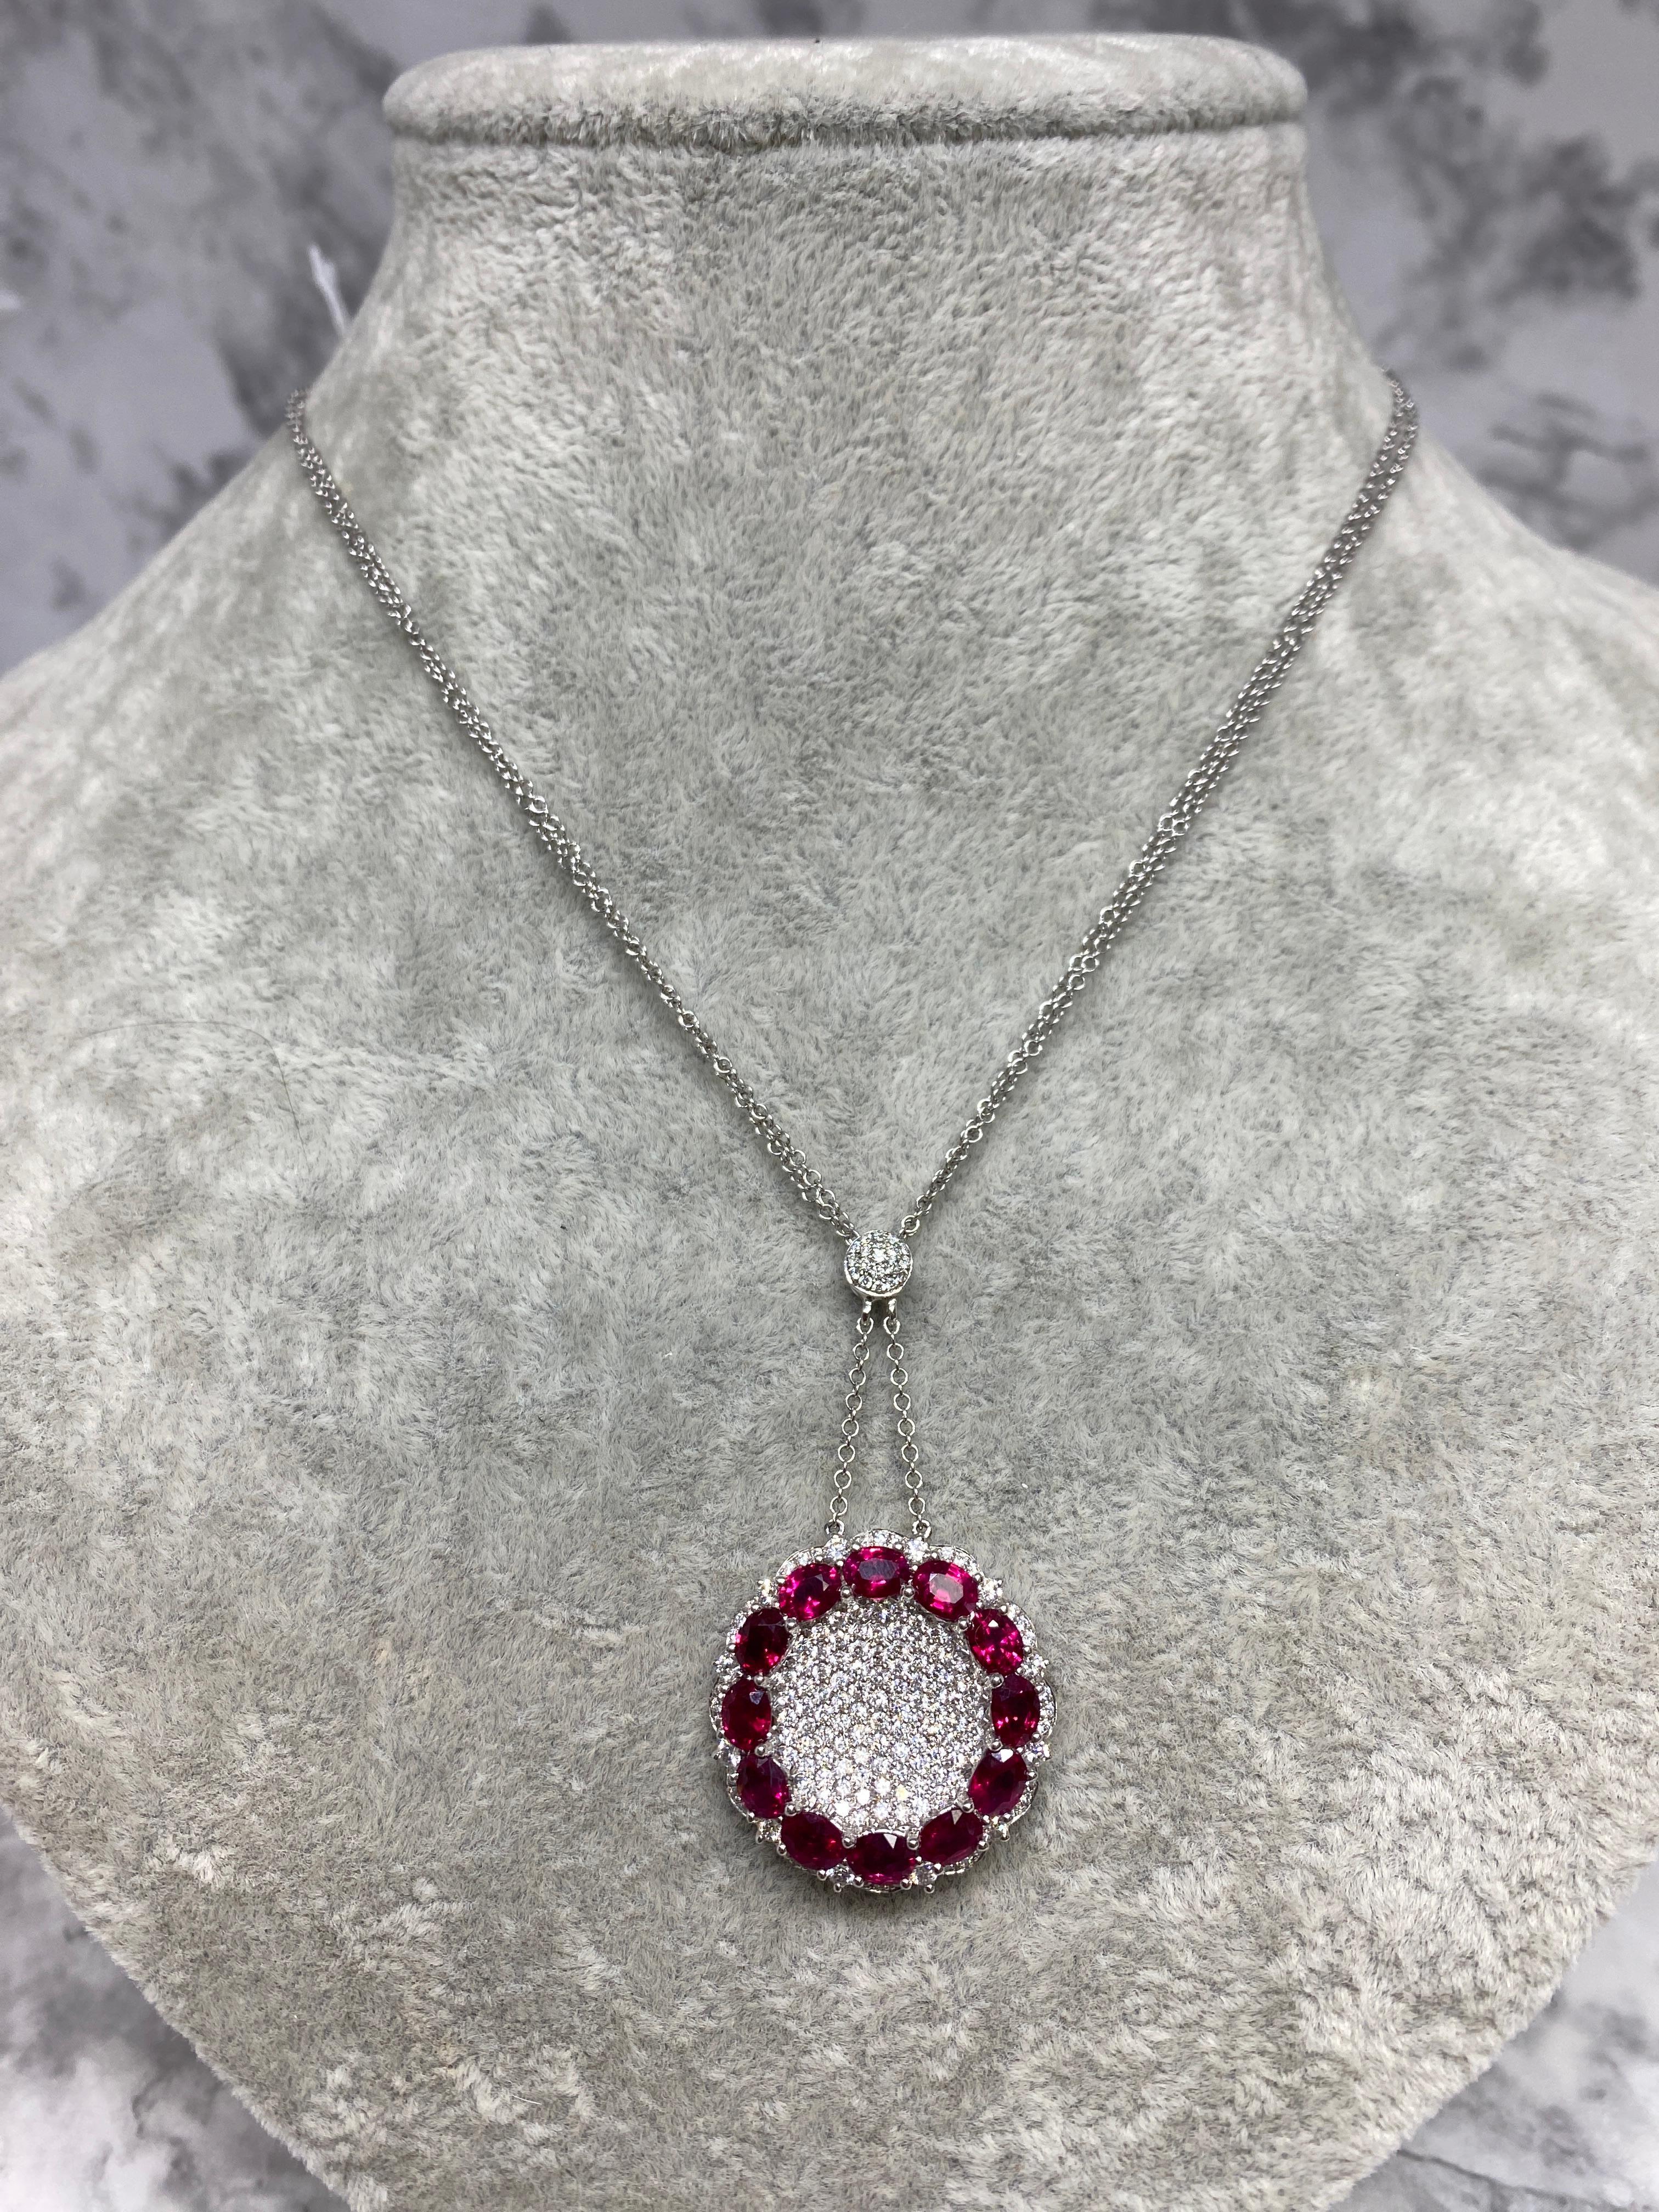 14k White Gold 5.04cttw Natural Ruby & Diamond Round Pendant Necklace  For Sale 3